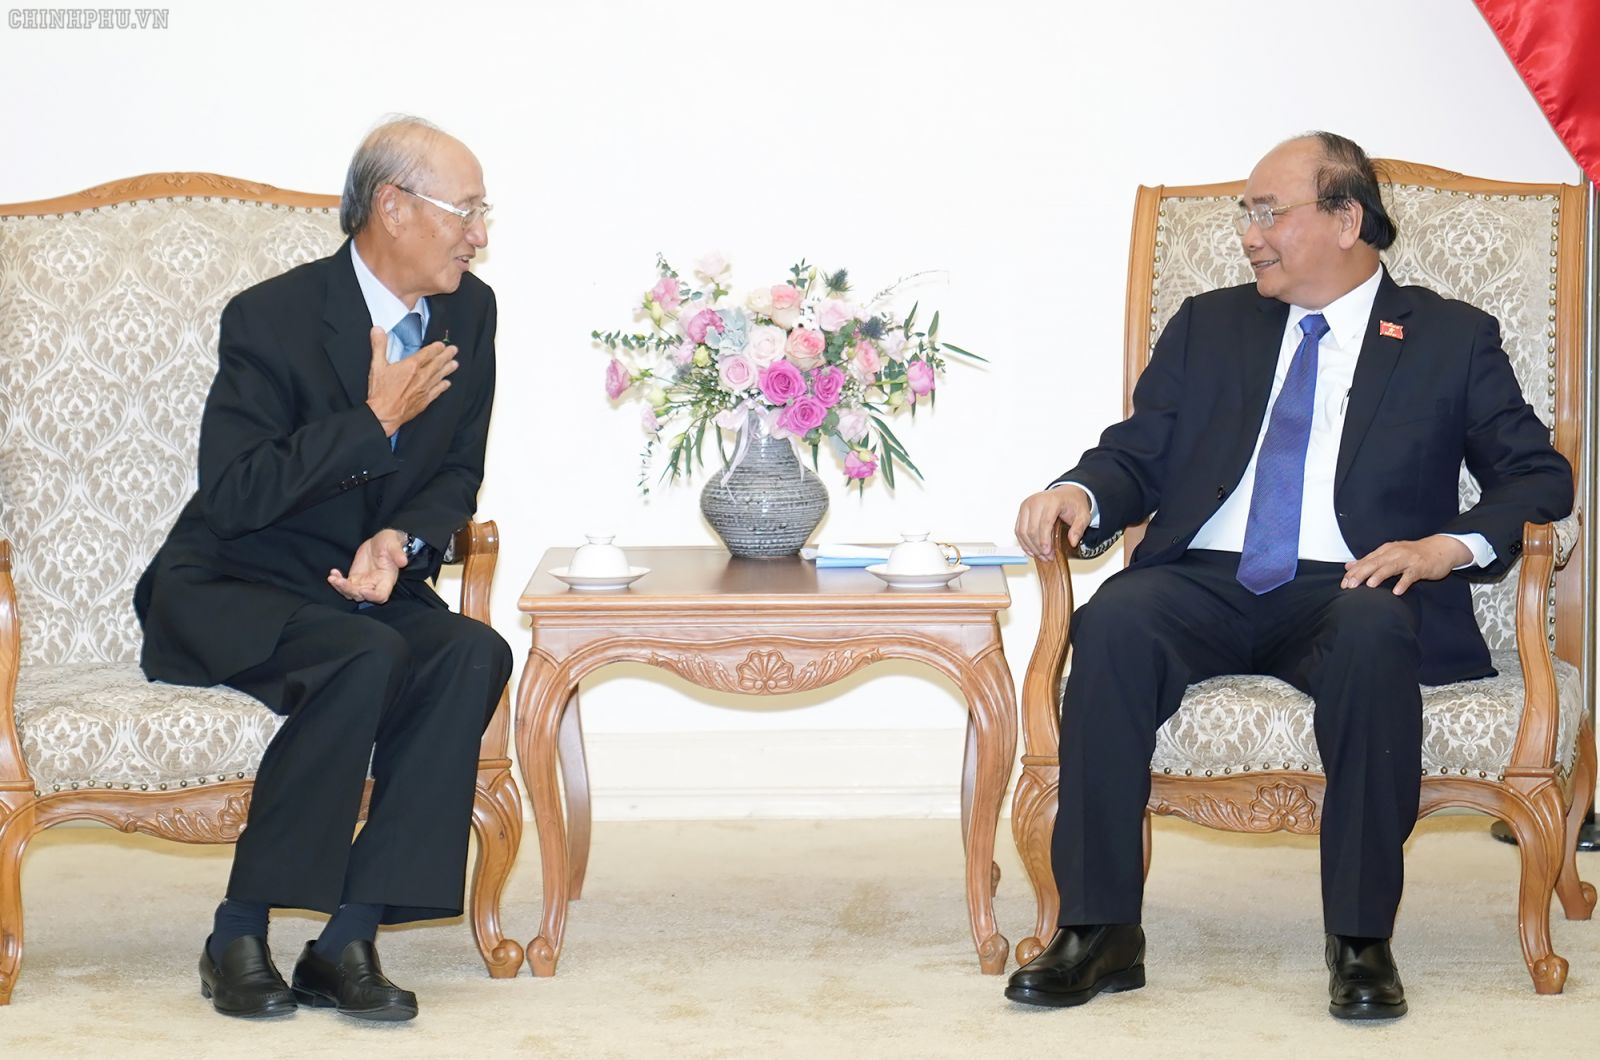 Prime Minister Nguyen Xuan Phuc (r) and Ng Kee Choe, CapitaLand’s chairman (l). (Source: VGP)